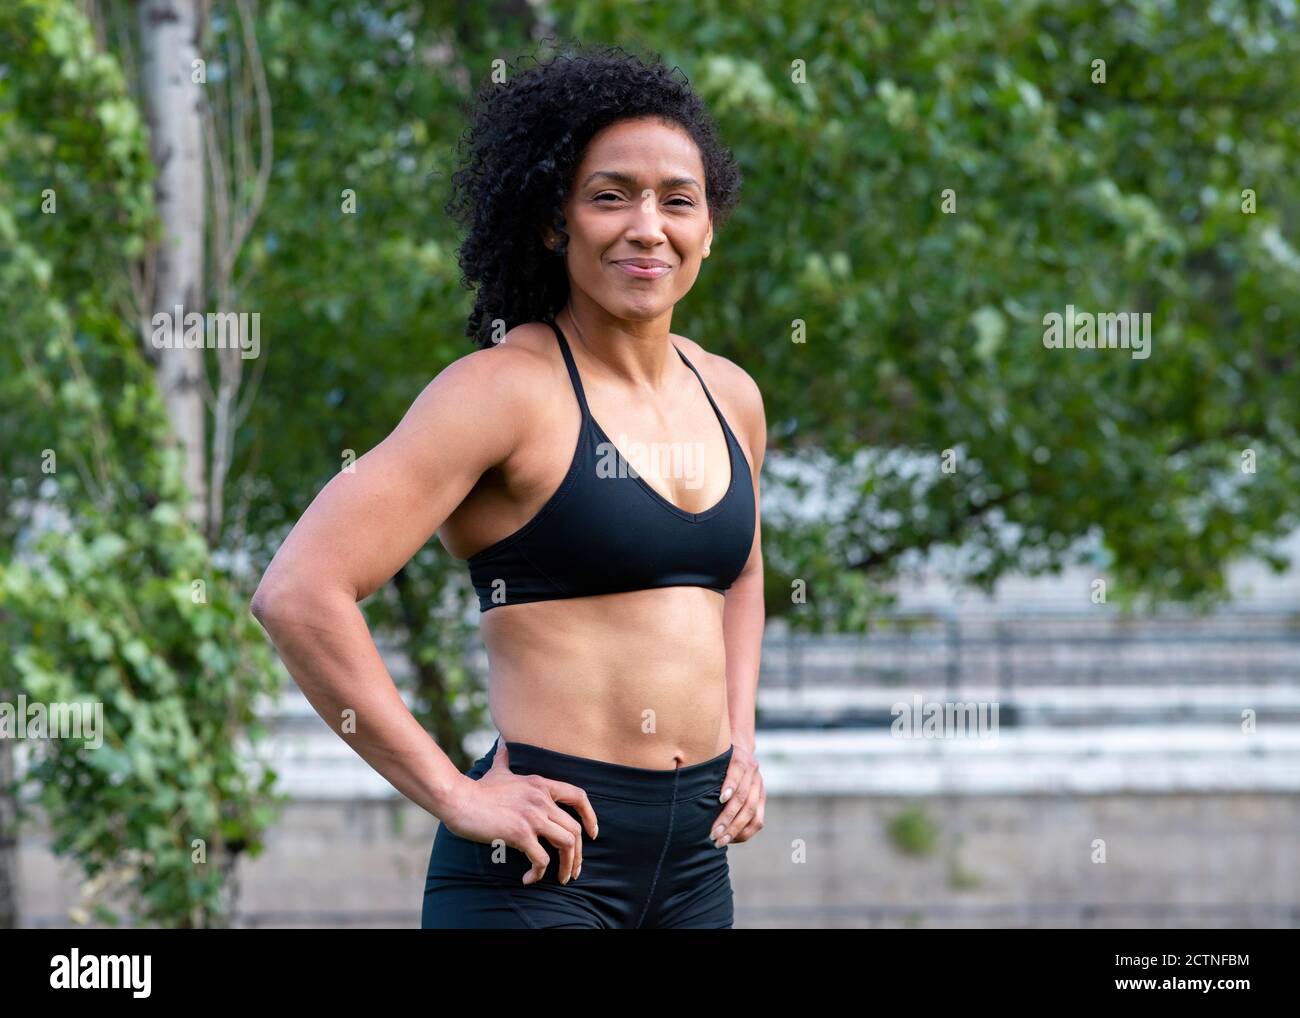 https://c8.alamy.com/comp/2CTNFBM/confident-african-american-athletic-female-with-muscular-body-standing-with-hands-on-waist-in-city-during-training-and-looking-at-camera-2CTNFBM.jpg